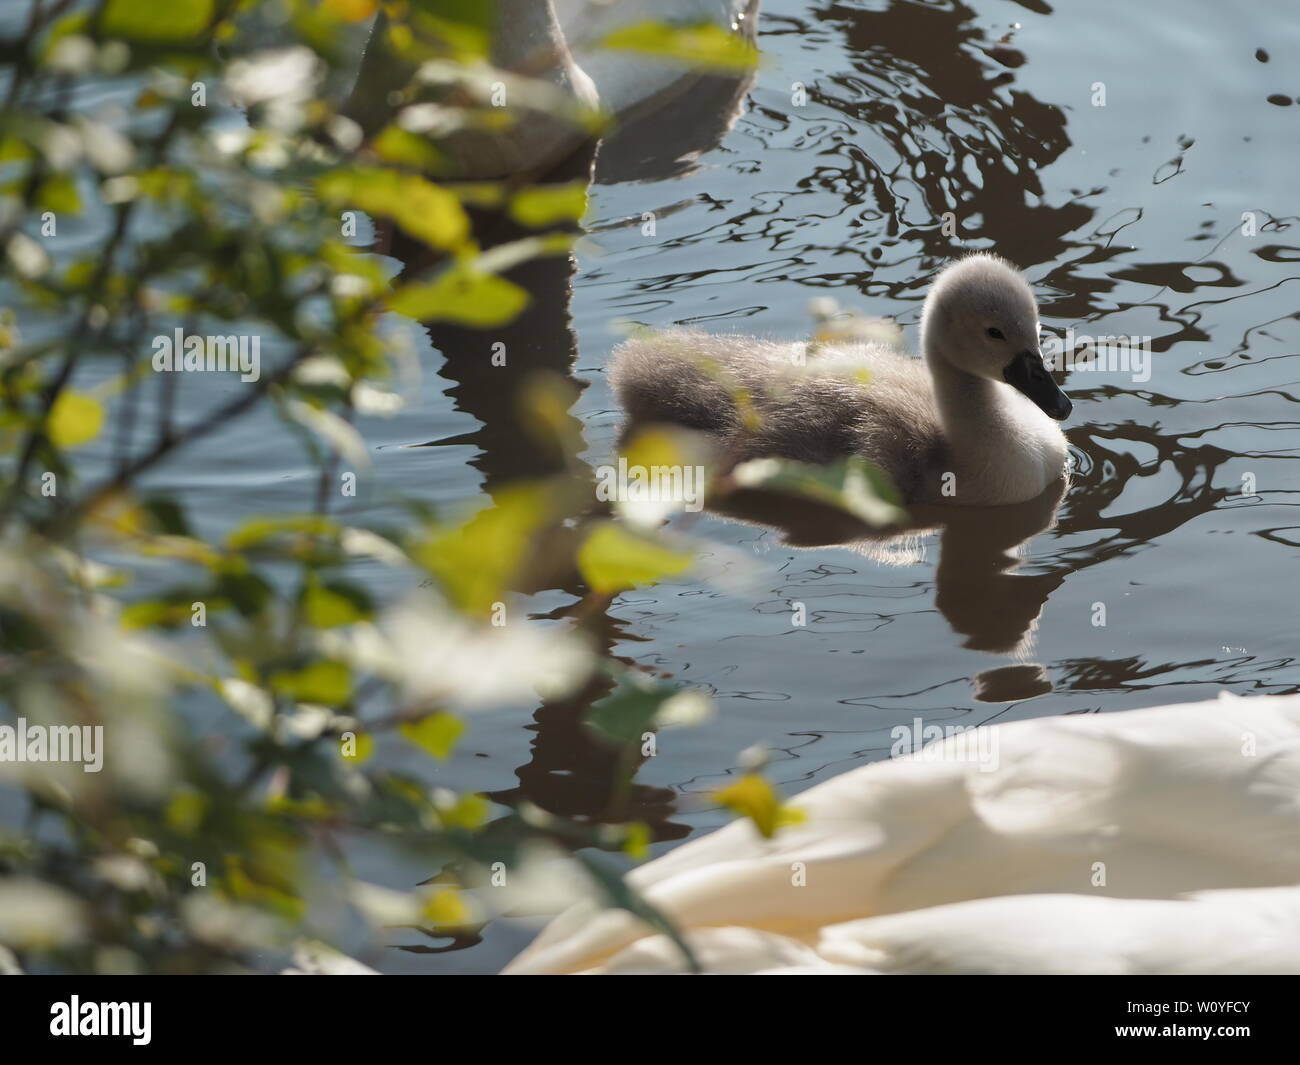 A young cygnet takes to the water. Stock Photo